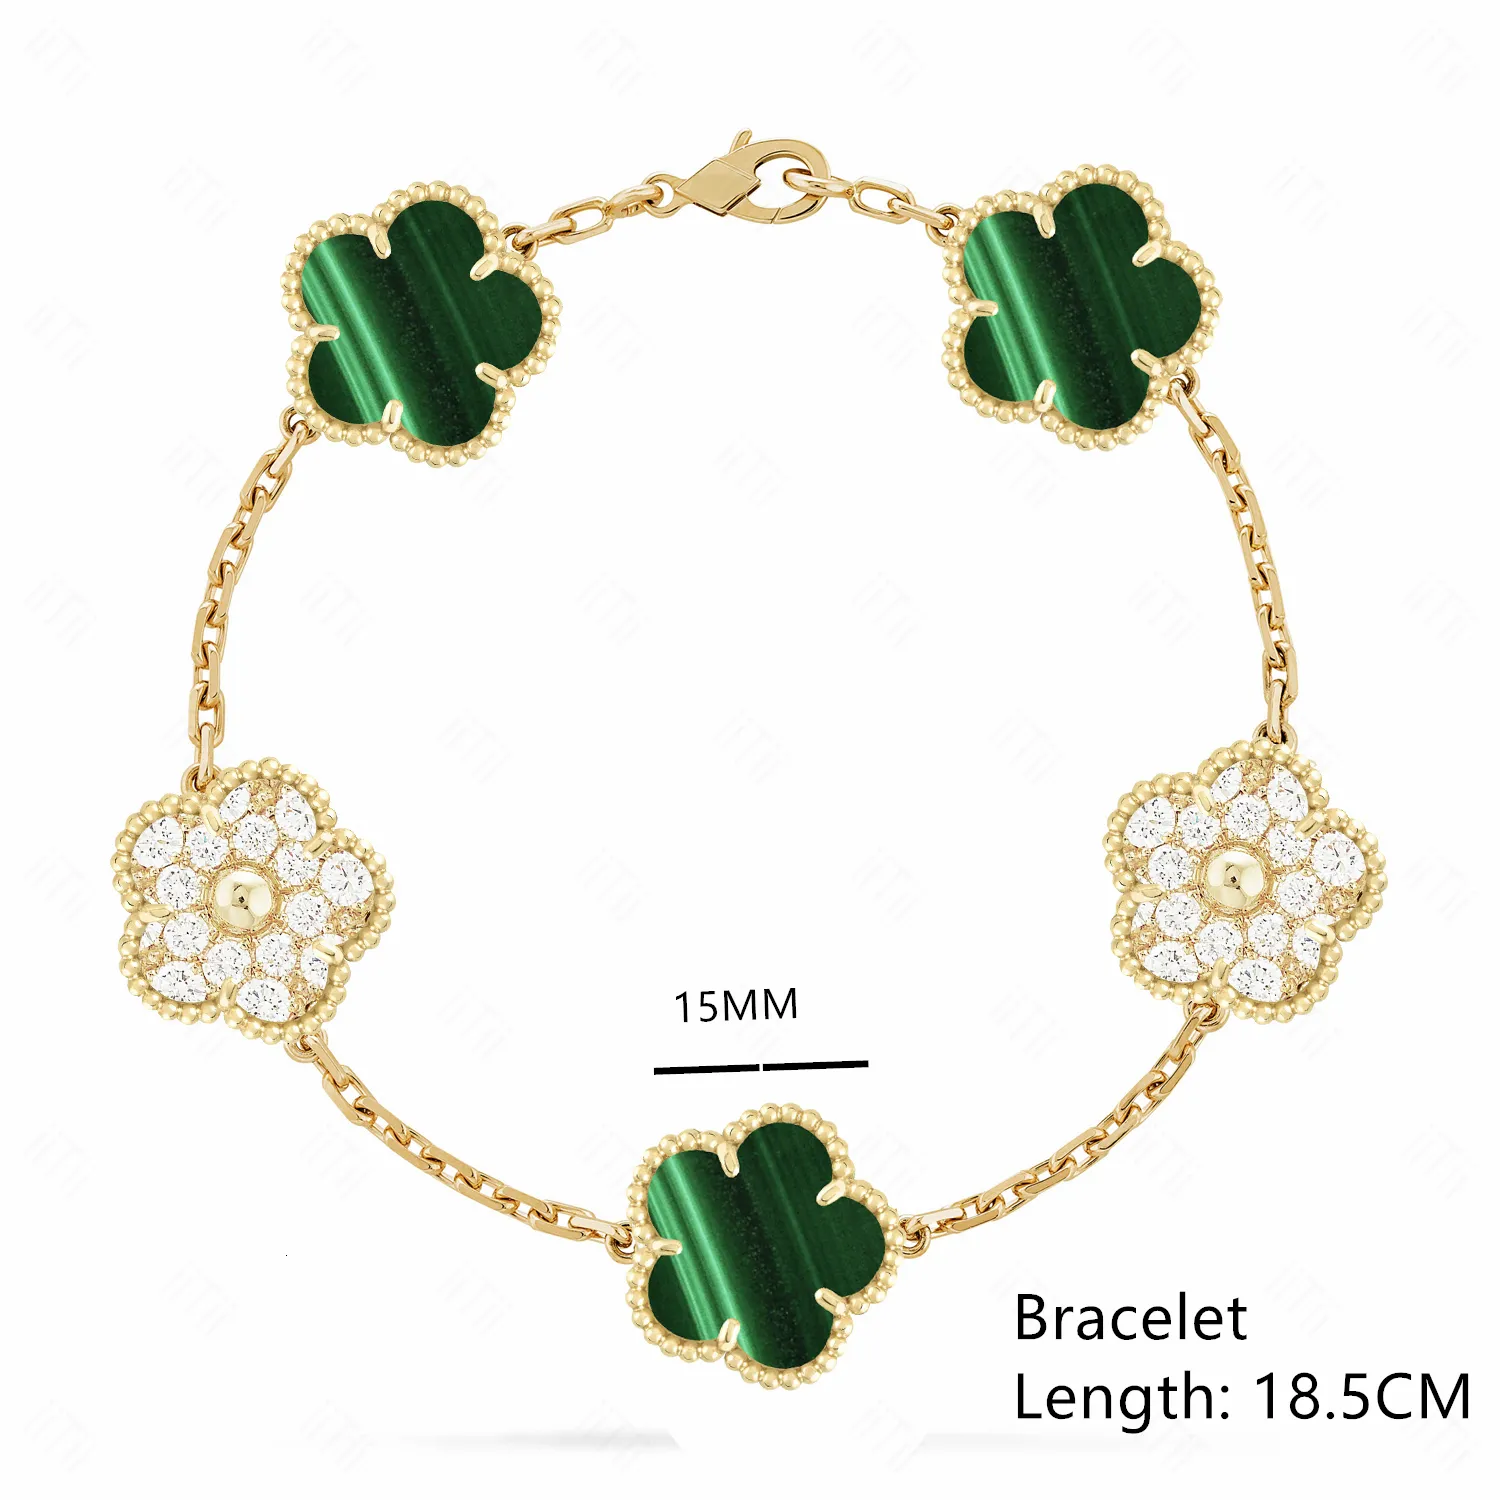 Designer Clover Chamilia Bracelet Argos For Women 18k  Gold/Silver/Black/White/Red/Green Wedding & Party Jewelry From Linjie95964,  $18.19 | DHgate.Com